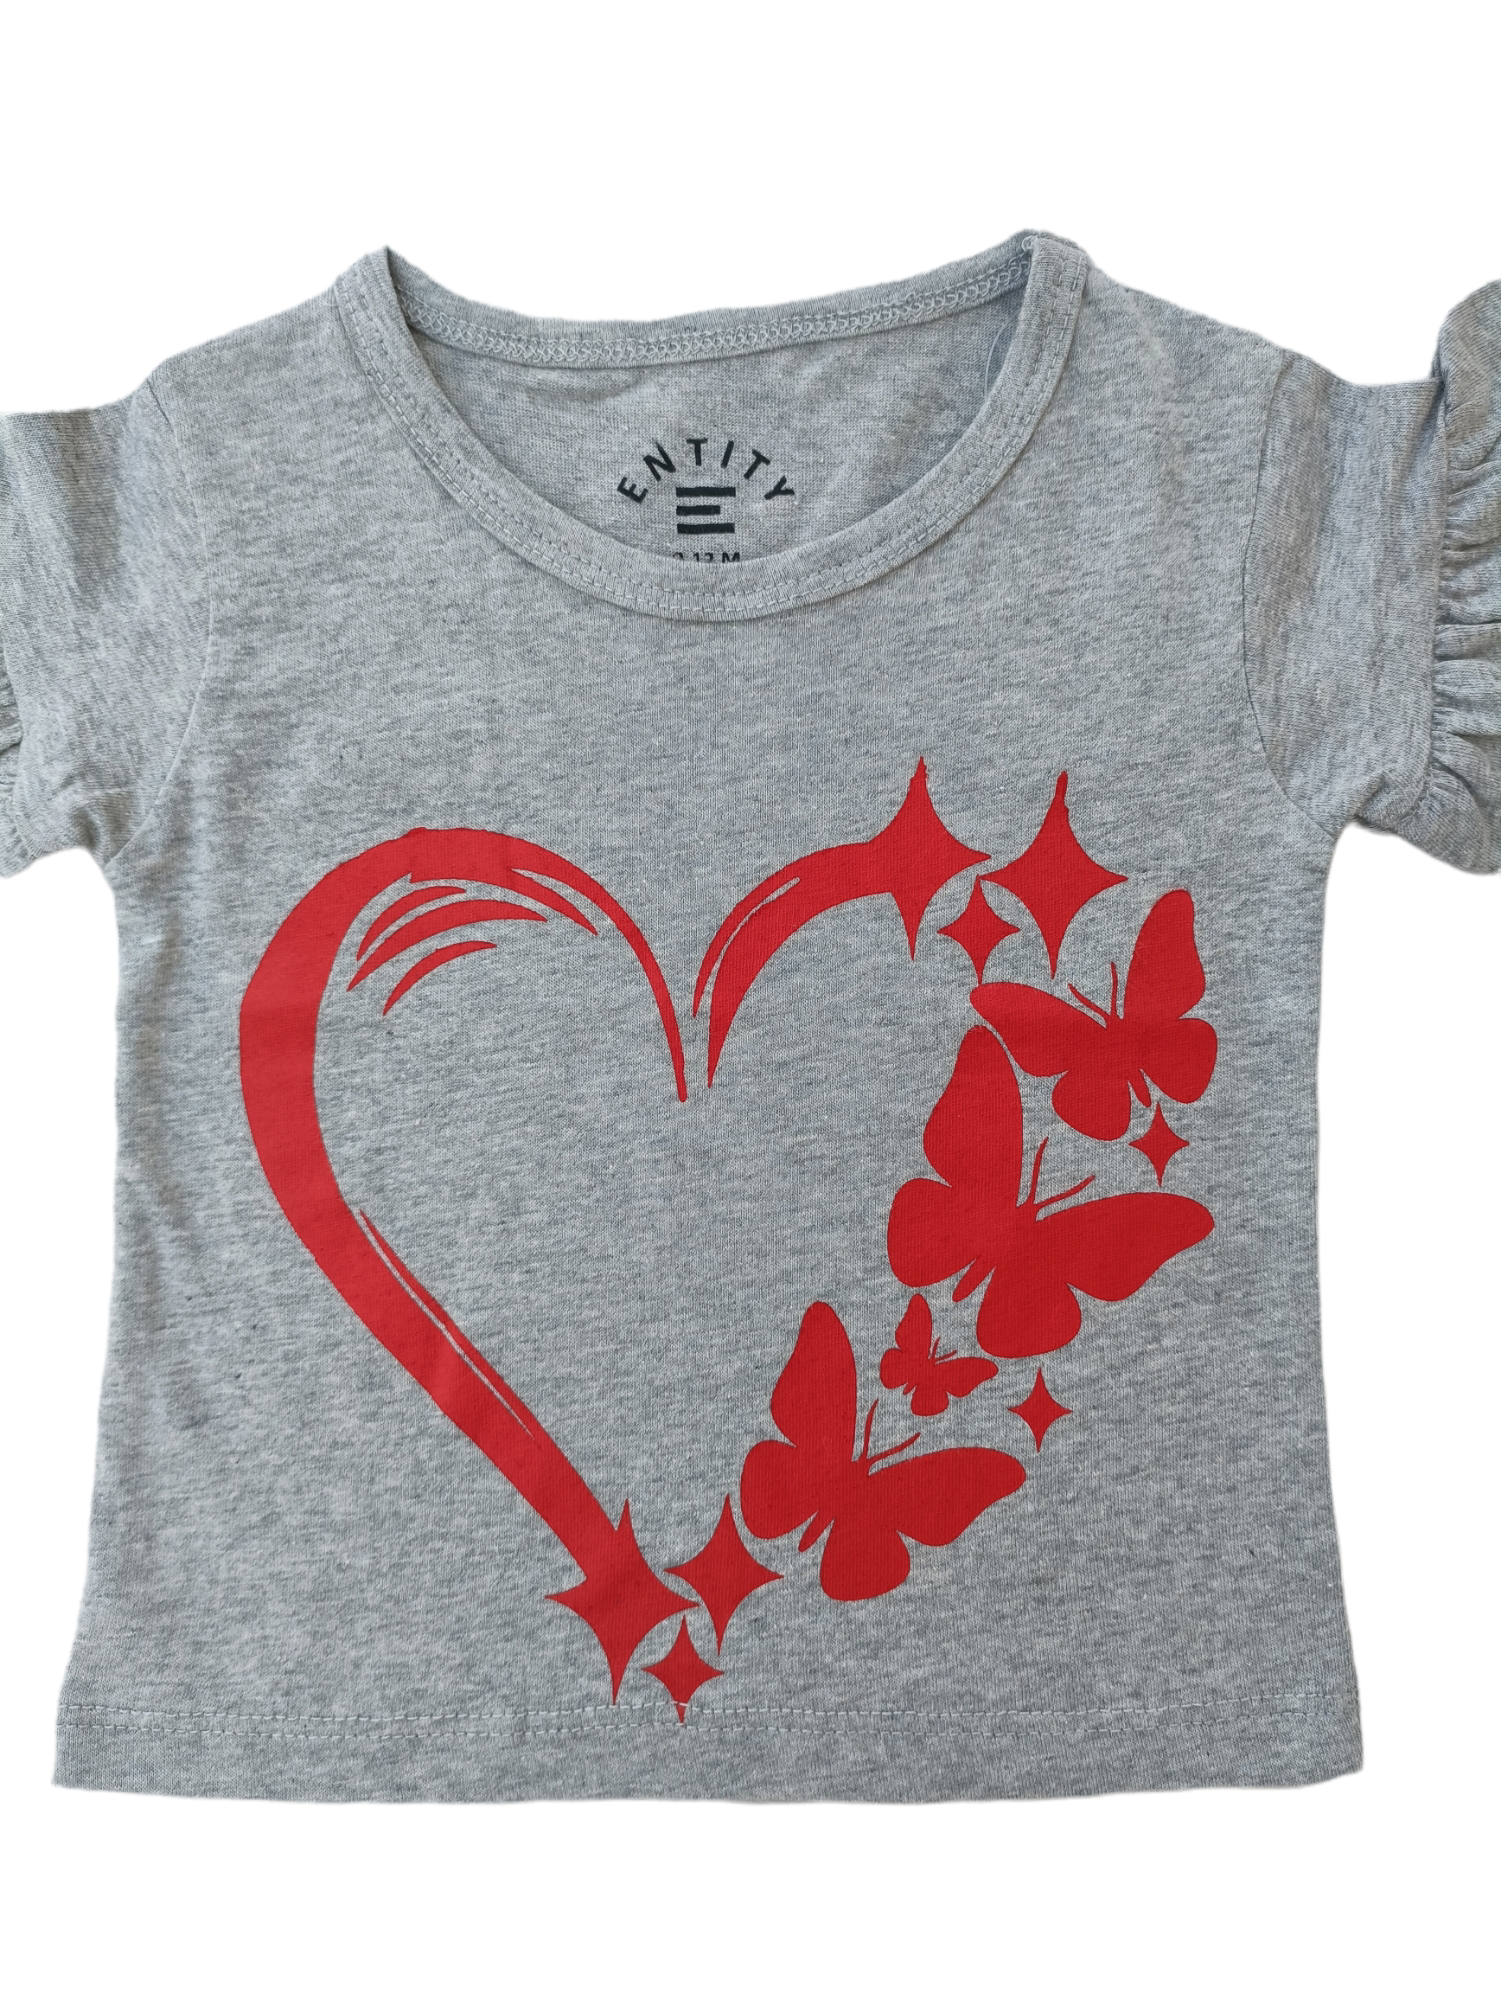 ENTITY HEART WITH BUTTERFLIES GRAPHIC T-SHIRT